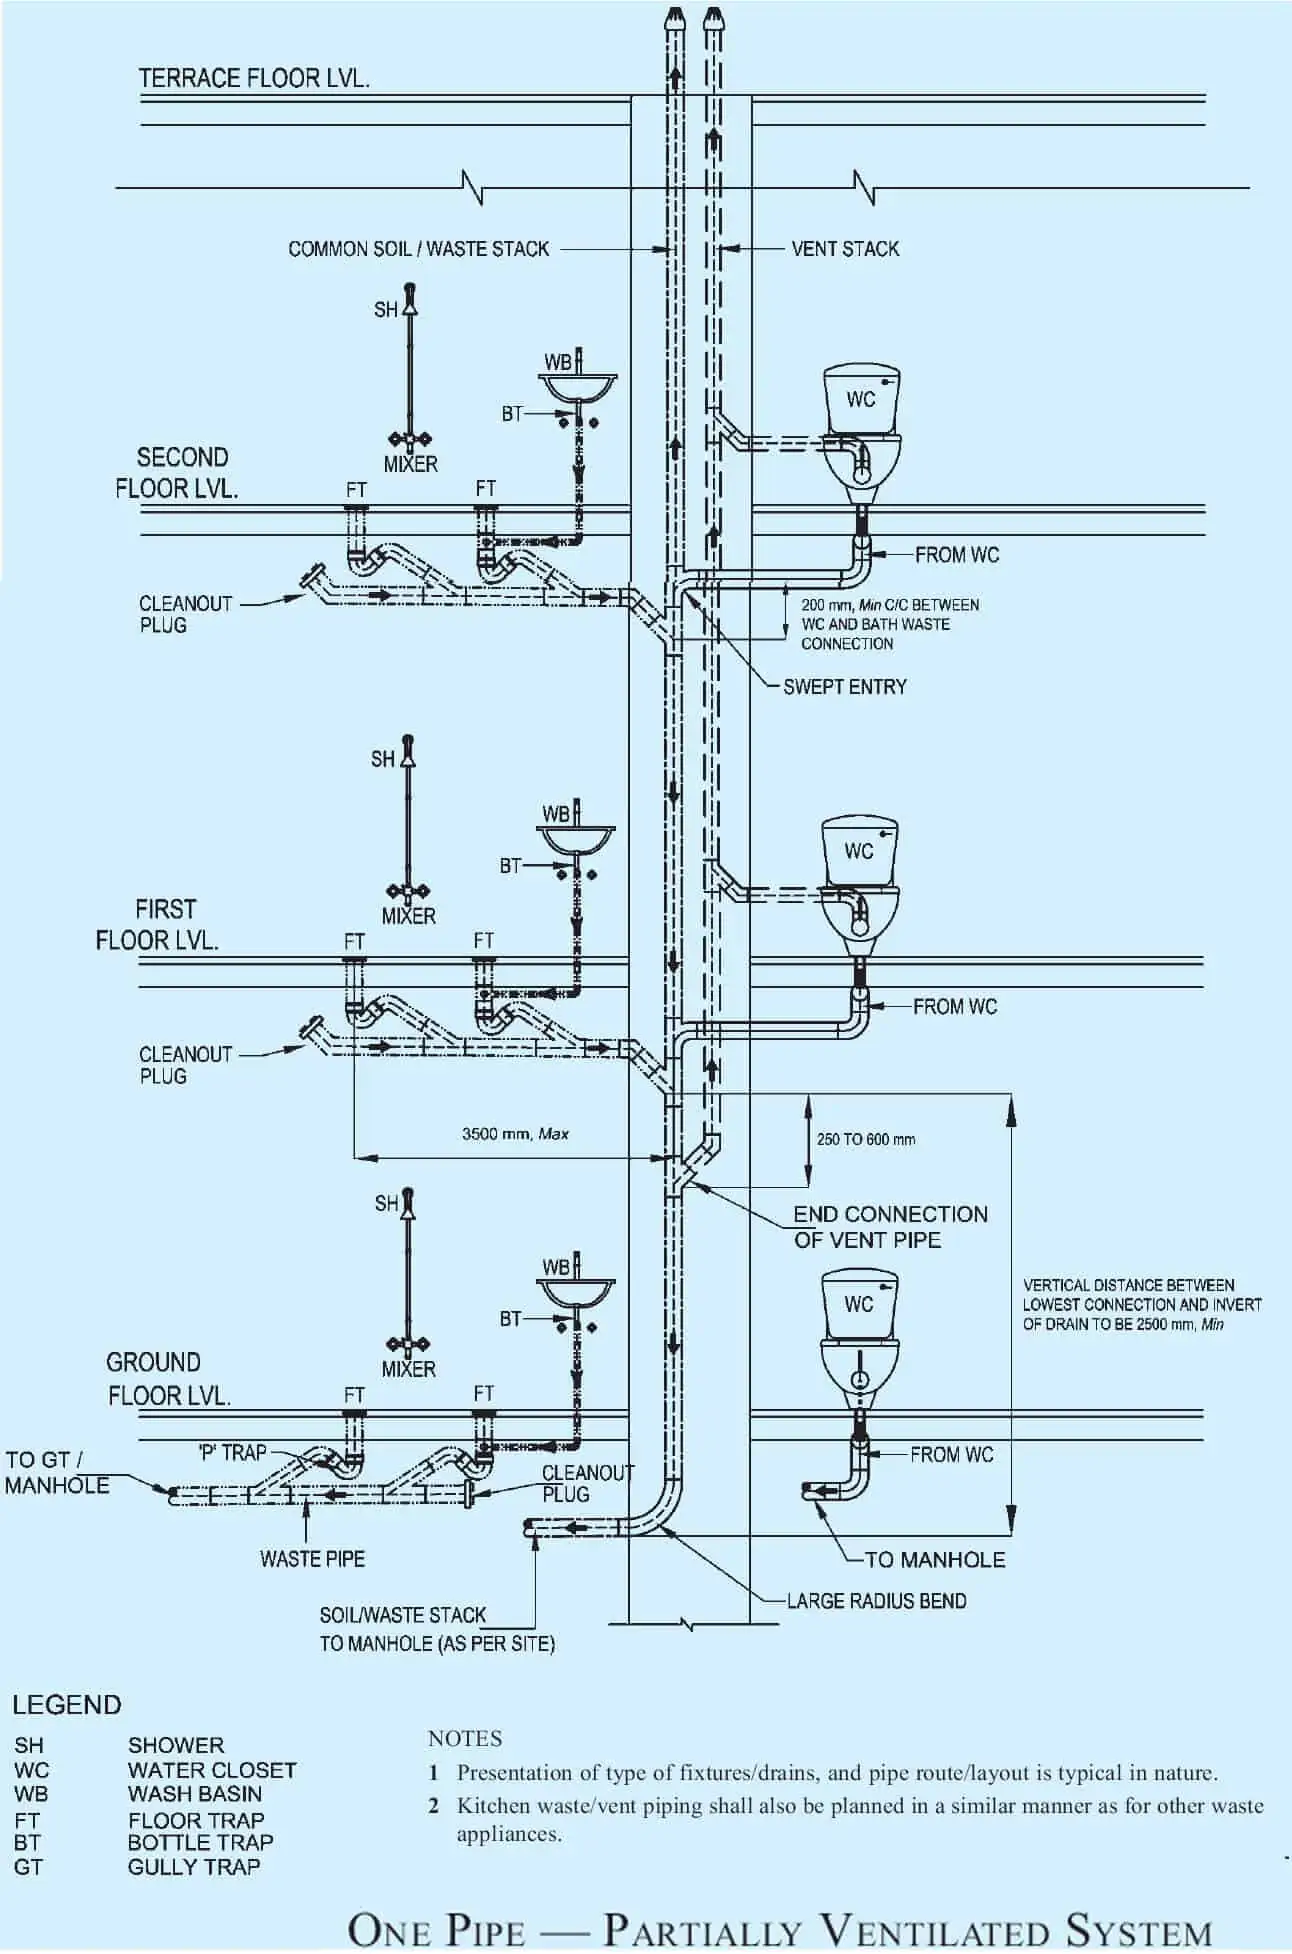  partially ventilated pipeline system